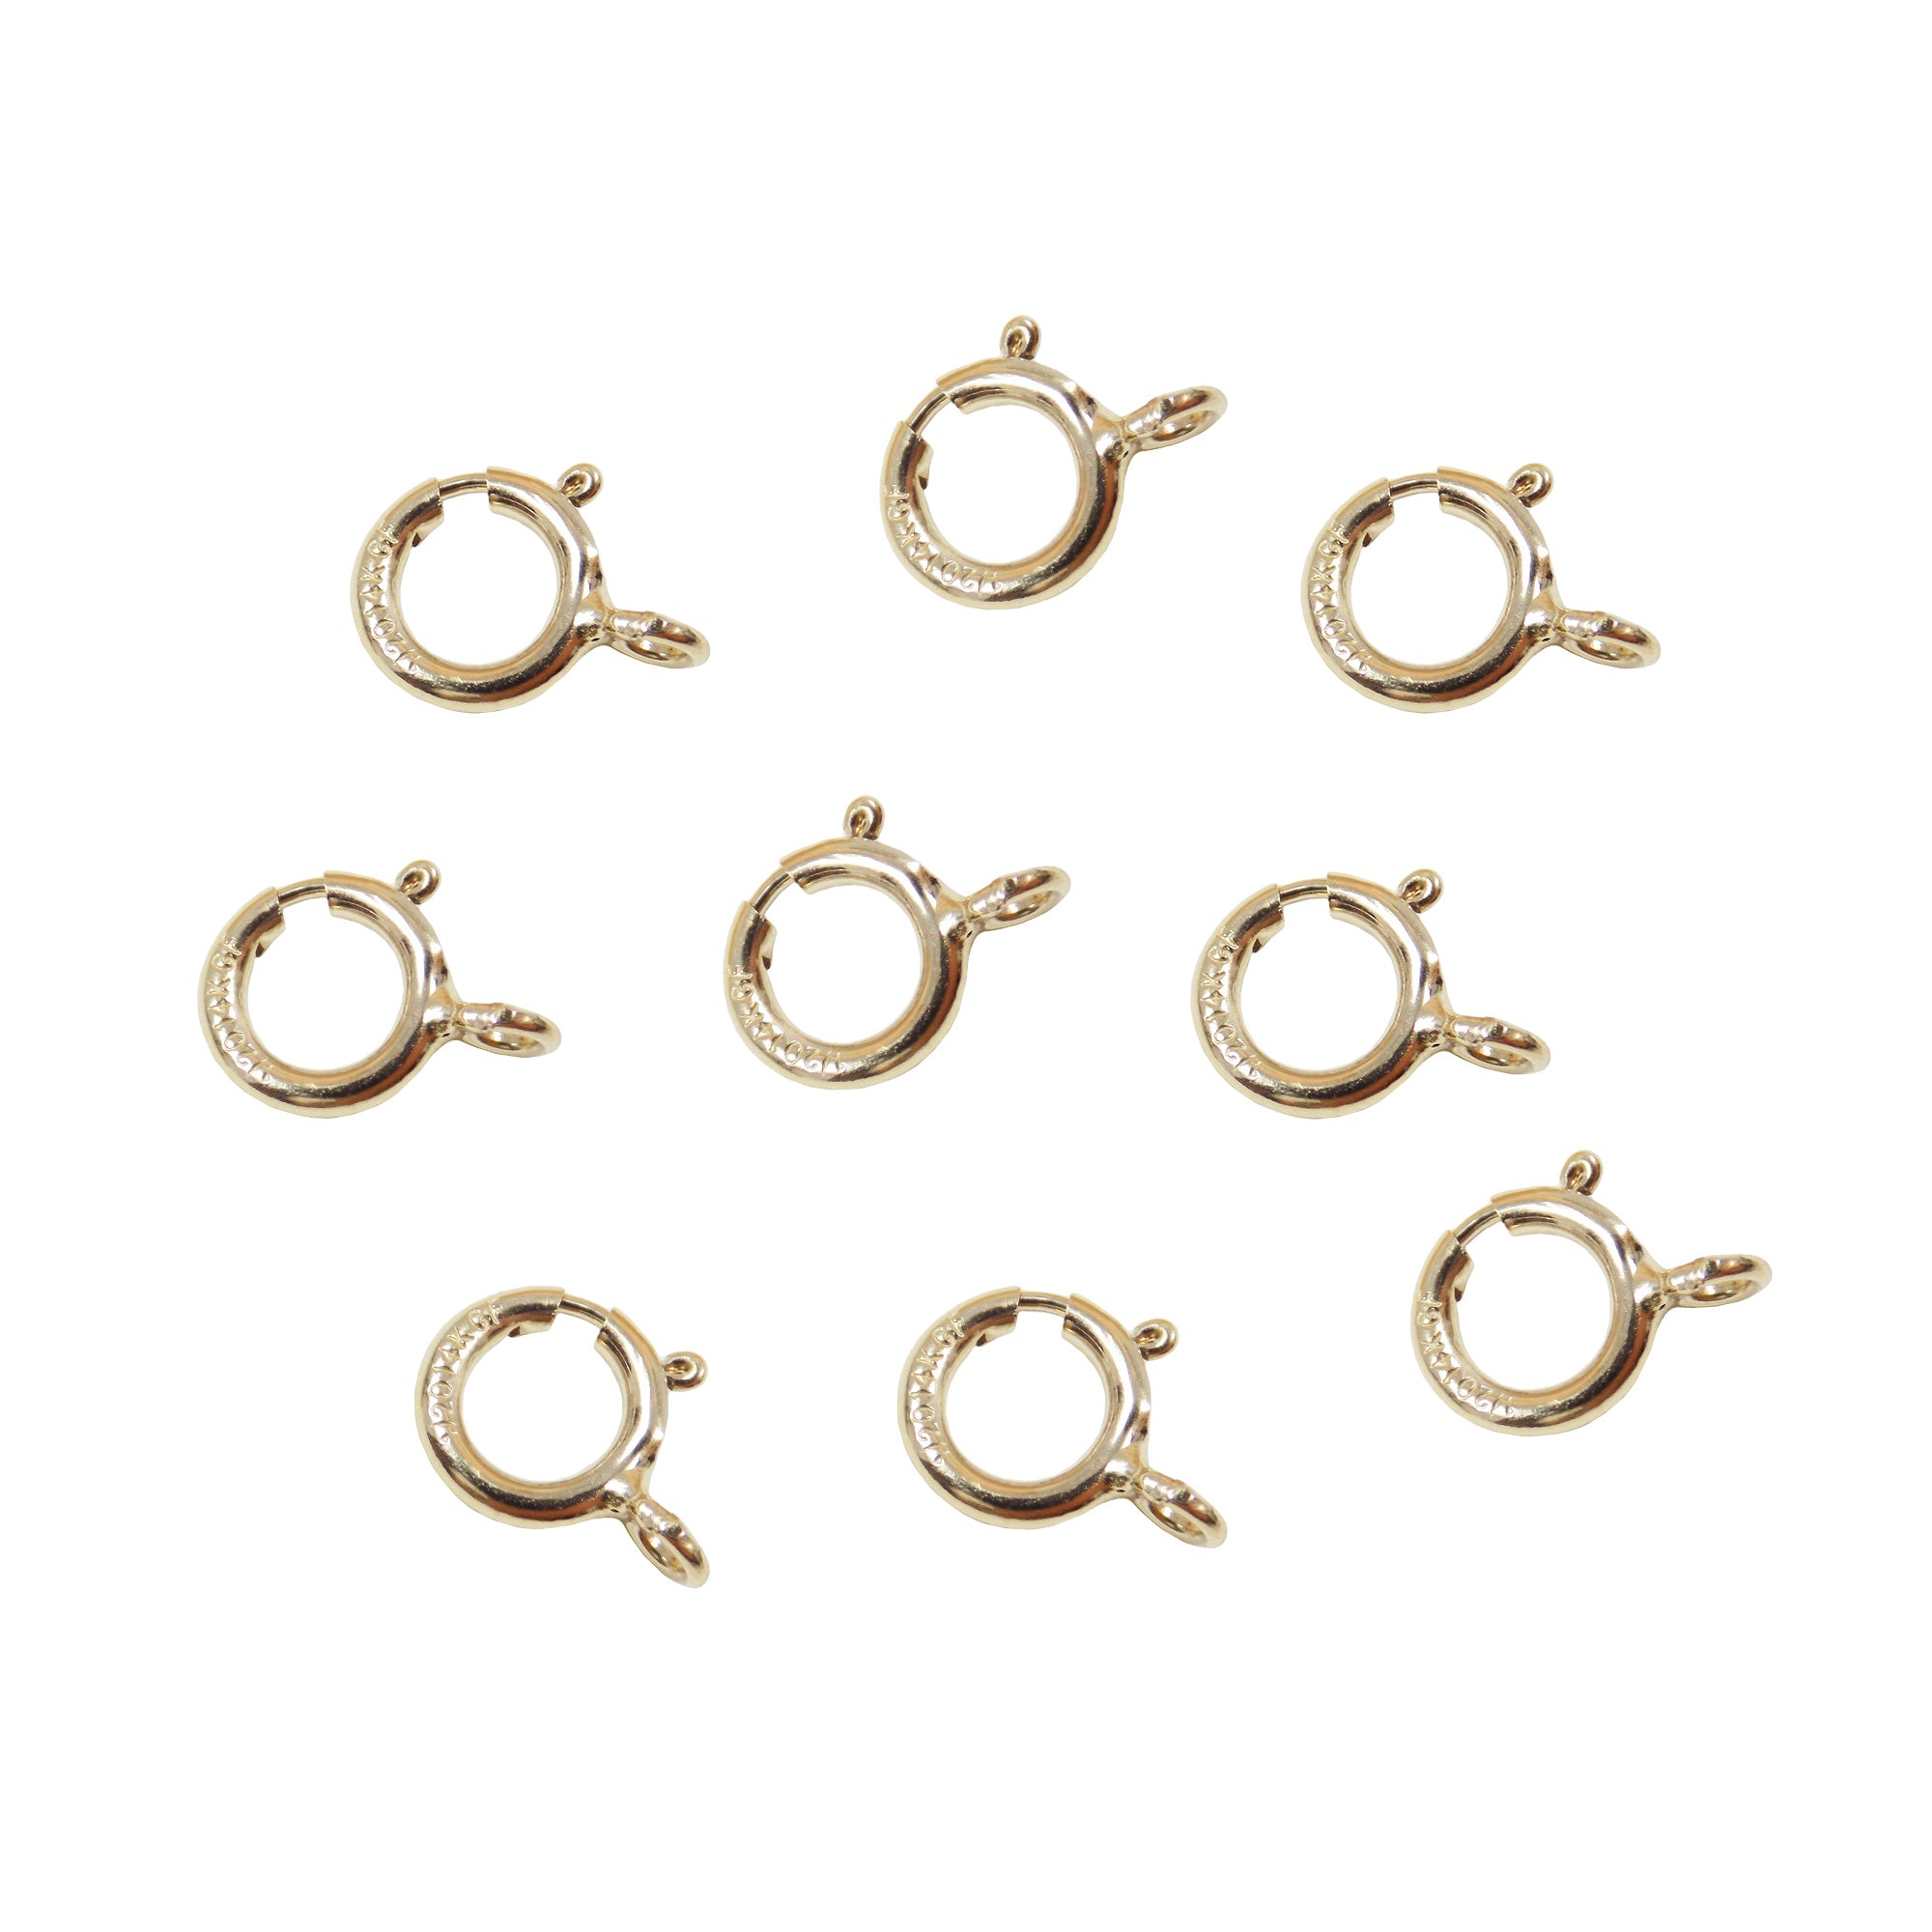 Spring Ring Clasp 6mm. 14 K Gold Filledw/ closed ring.